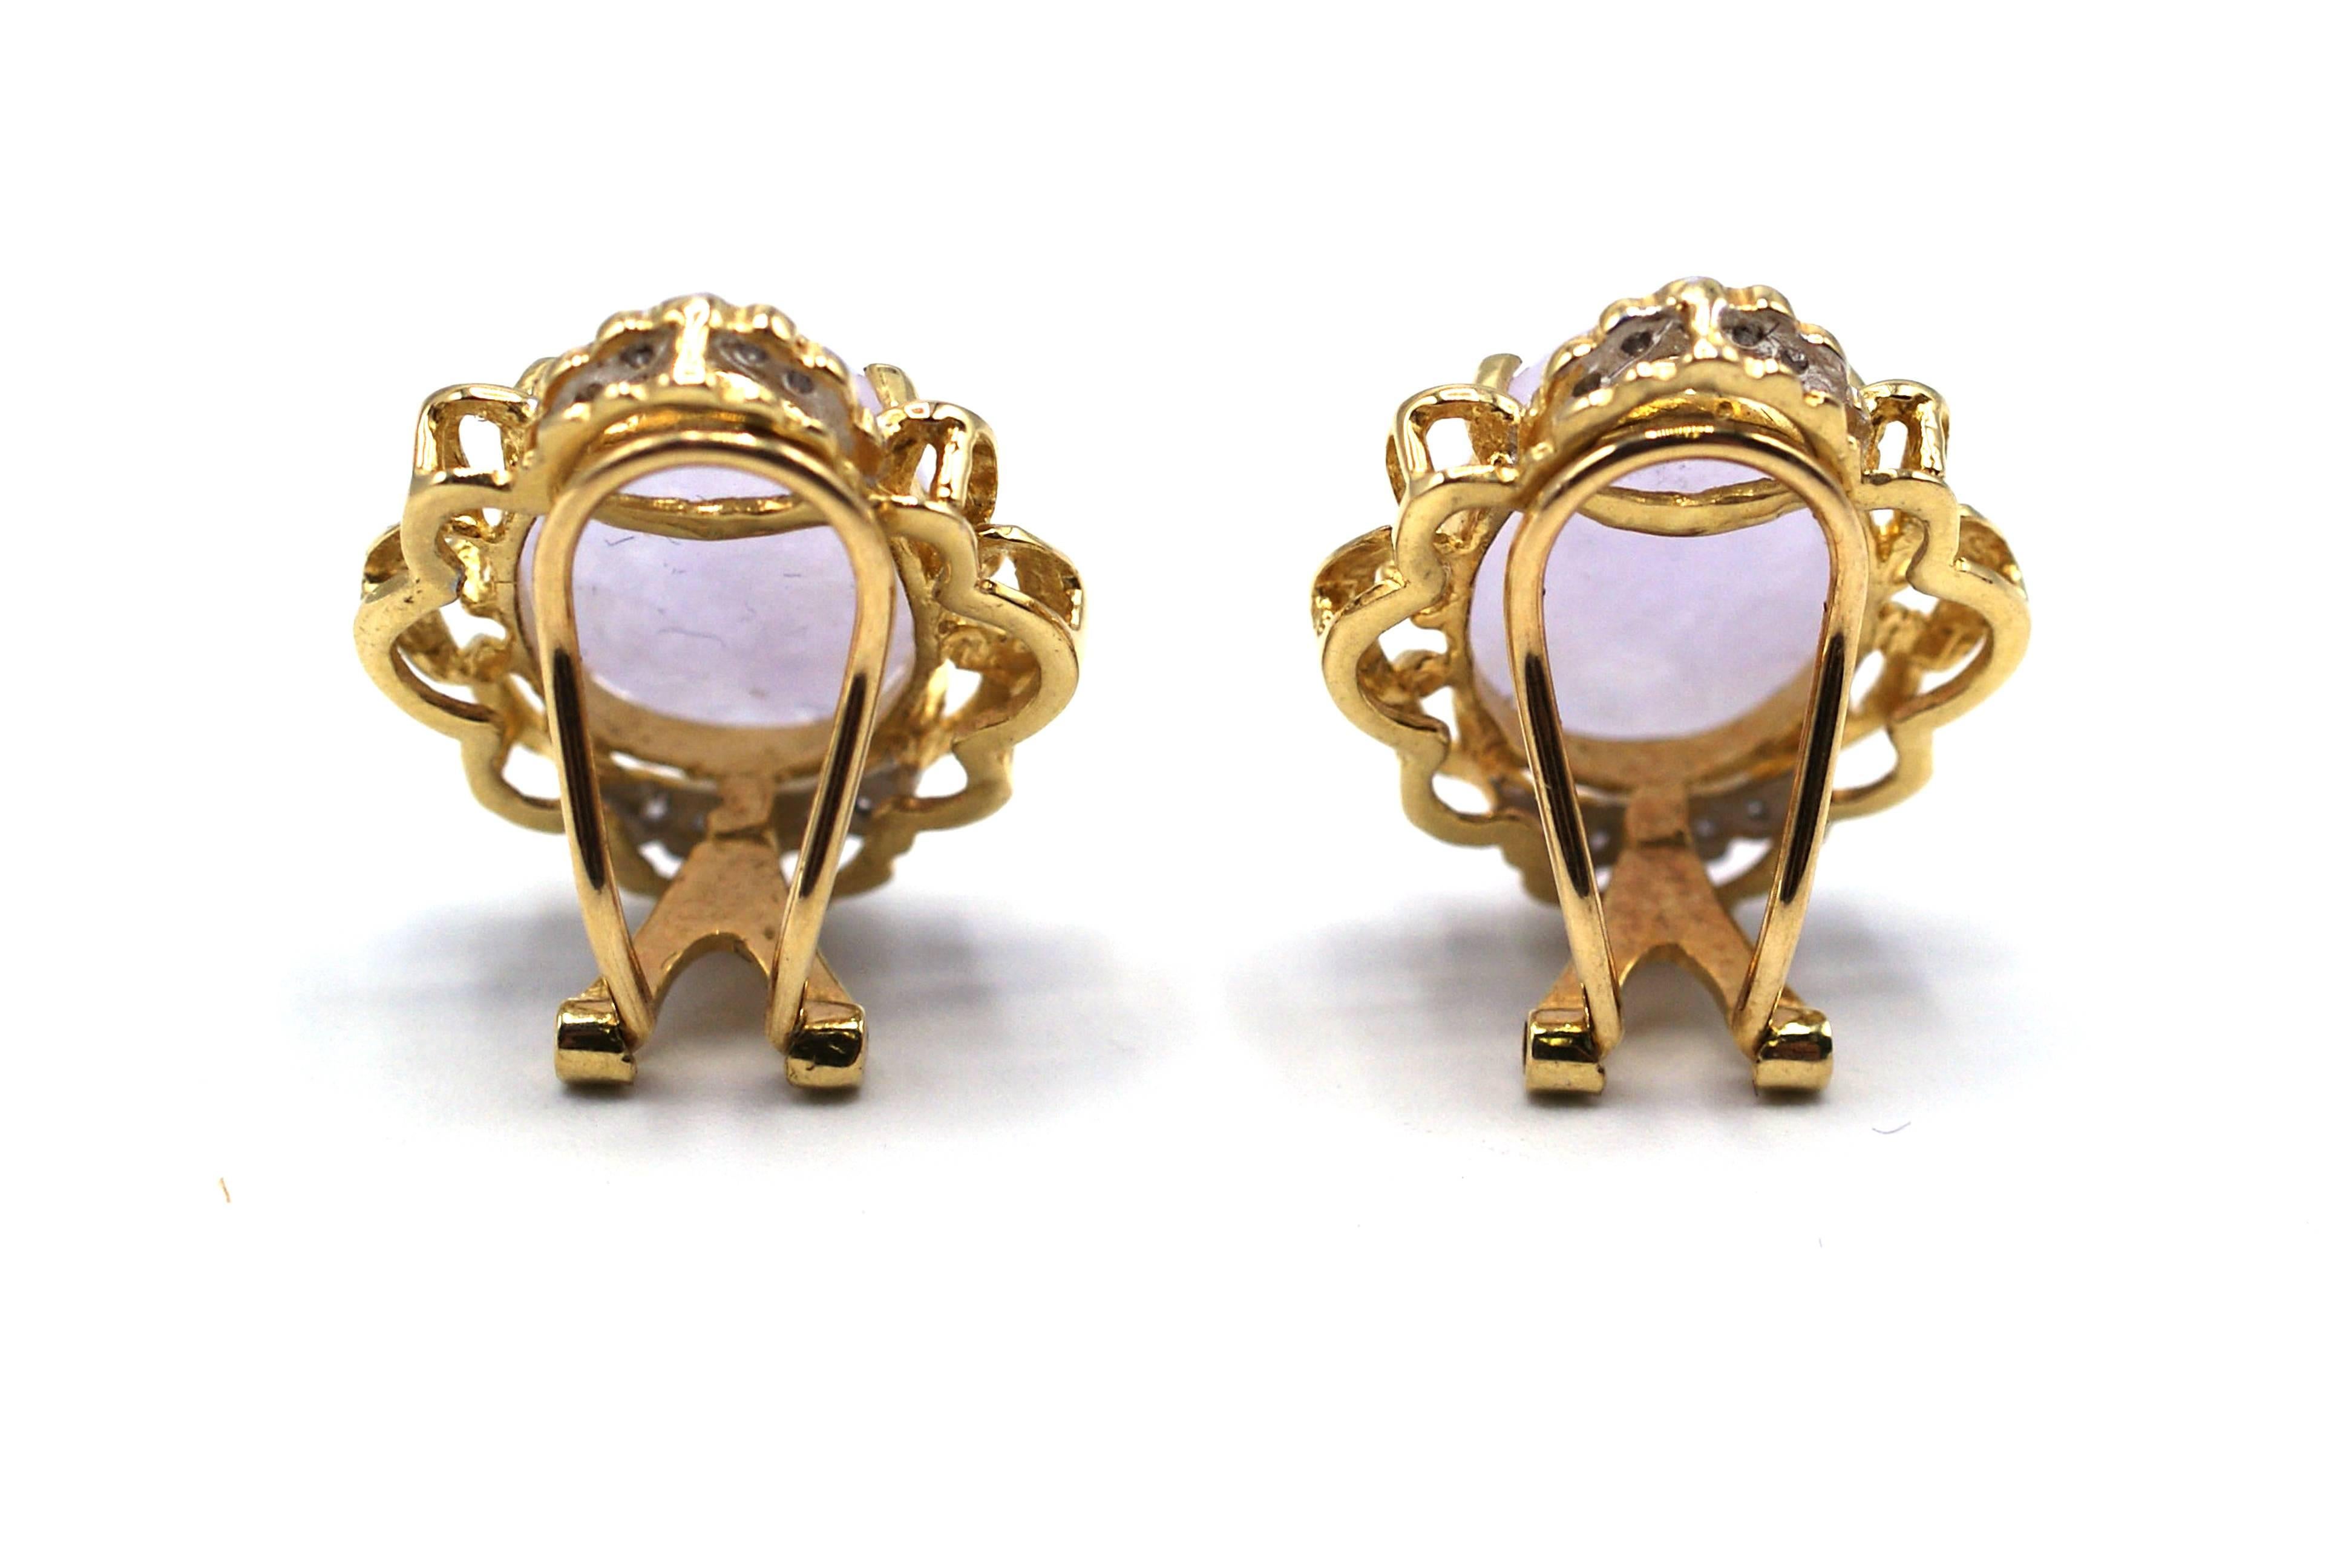 Beautiful lavender jade cabochons, perfectly matched in size and color are set in a yellow and white gold ornate mounting, with an omega clip back. The cabochons measure approximately 13.8 mm by 10.3 mm and are prong set with wave like gold work